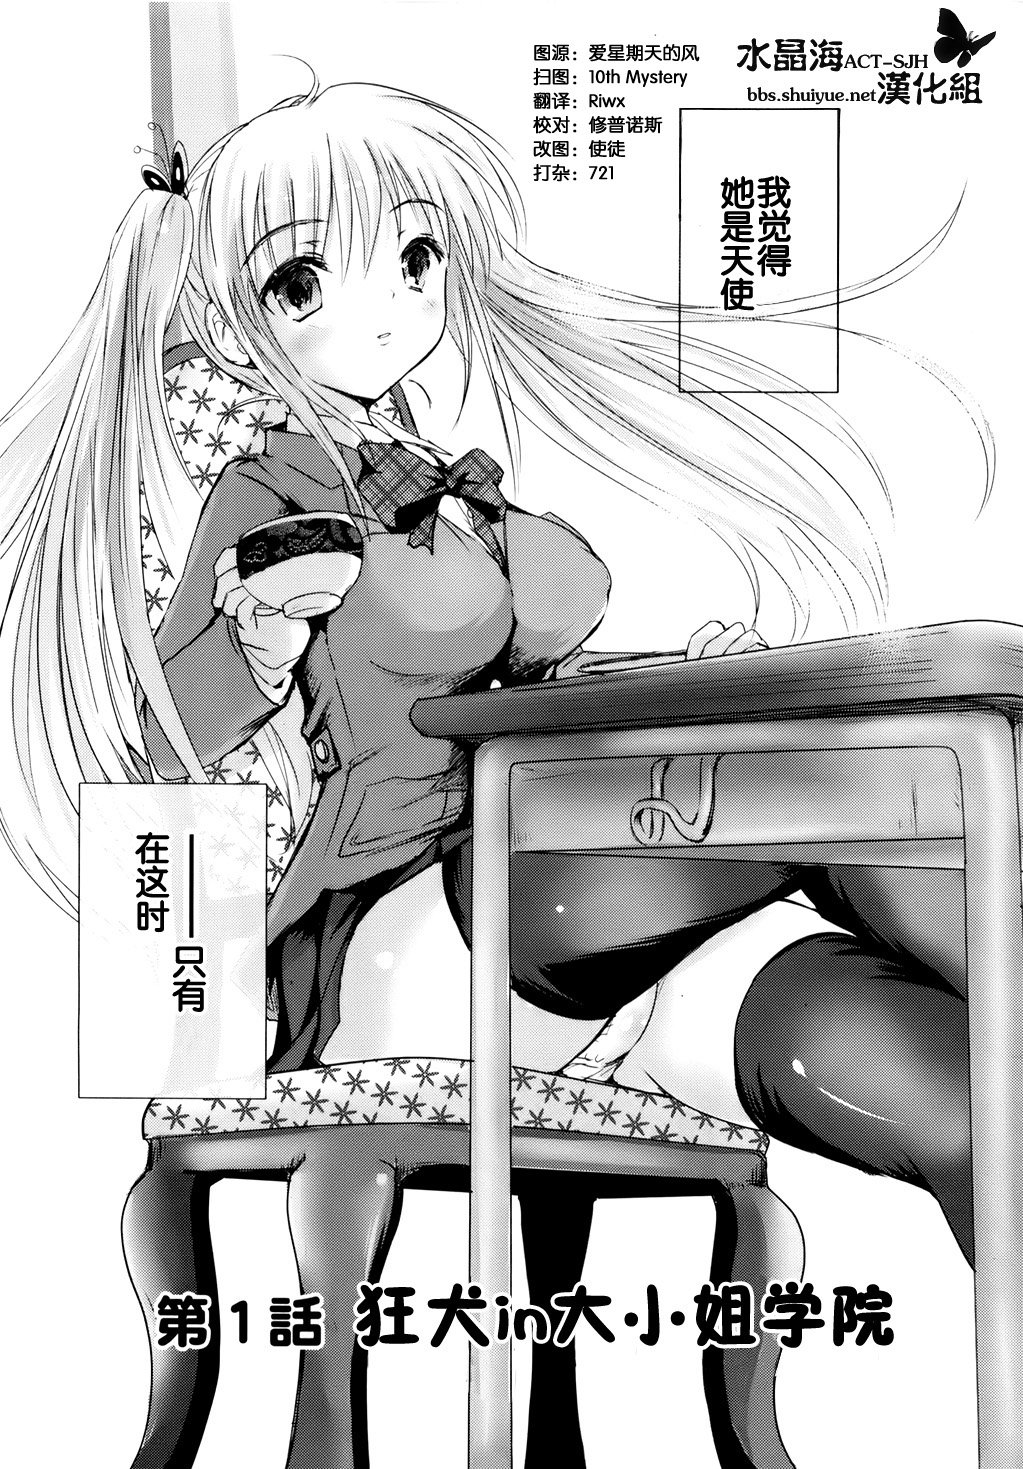 [Natsume Fumika] Sundere! Ch. 1 [Chinese] [夏目文花] スンデレ! 章1 [中文翻譯]